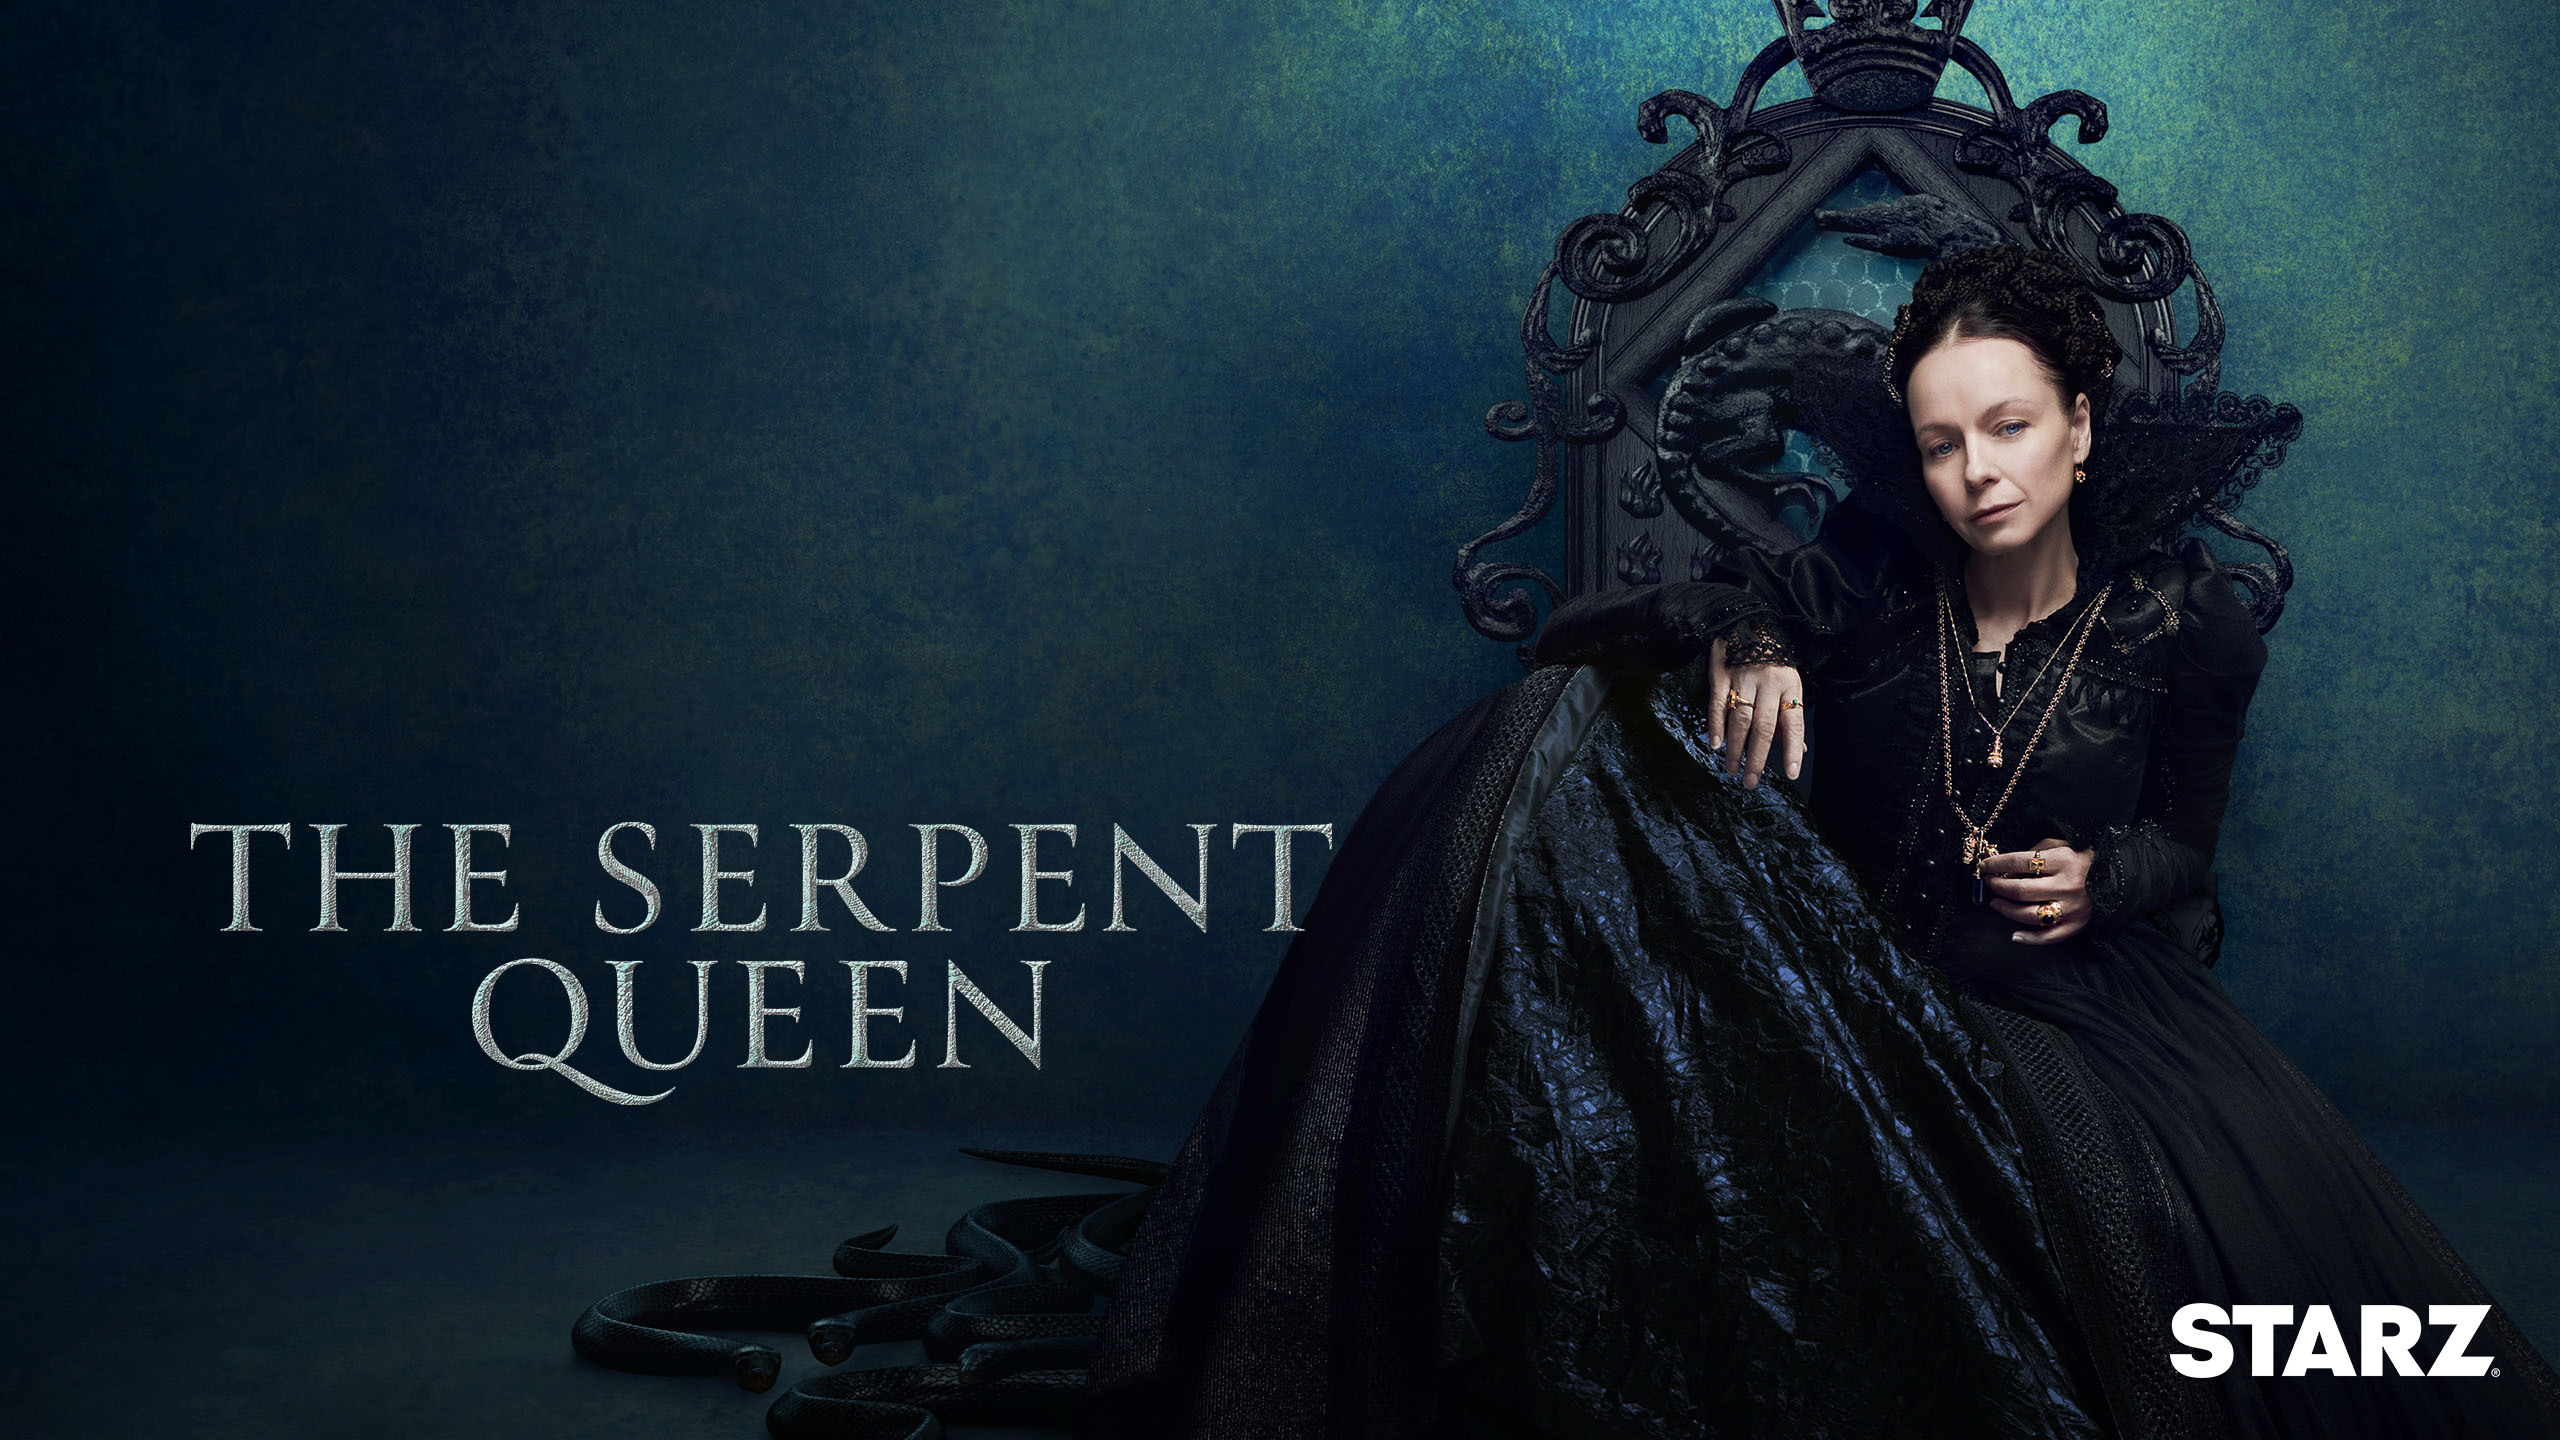 'The Serpent Queen' Season 2 Trailer Promises More Drama and Intrigue on Starz!